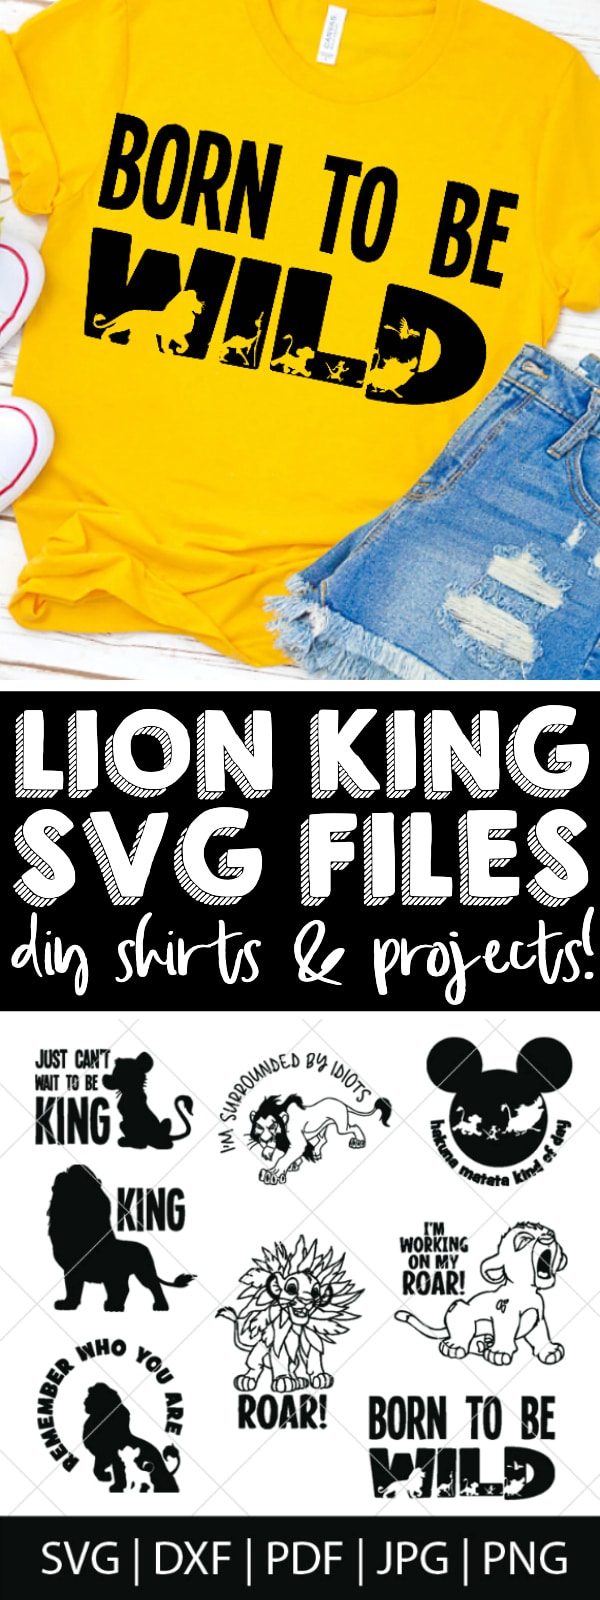 Make your own DIY Lion King shirts or gifts with this Lion King SVG Bundle - Simba, Nala, Timon and Pumba are a very big deal in our household! These files are perfect for making our Disney World shirts for our upcoming trip as well as birthday party invites and decor for a Lion King party! Make DIY shirts, mugs, gifts and more! | THE LOVE NERDS #disneycrafts  #diydisney #lionkingcricut